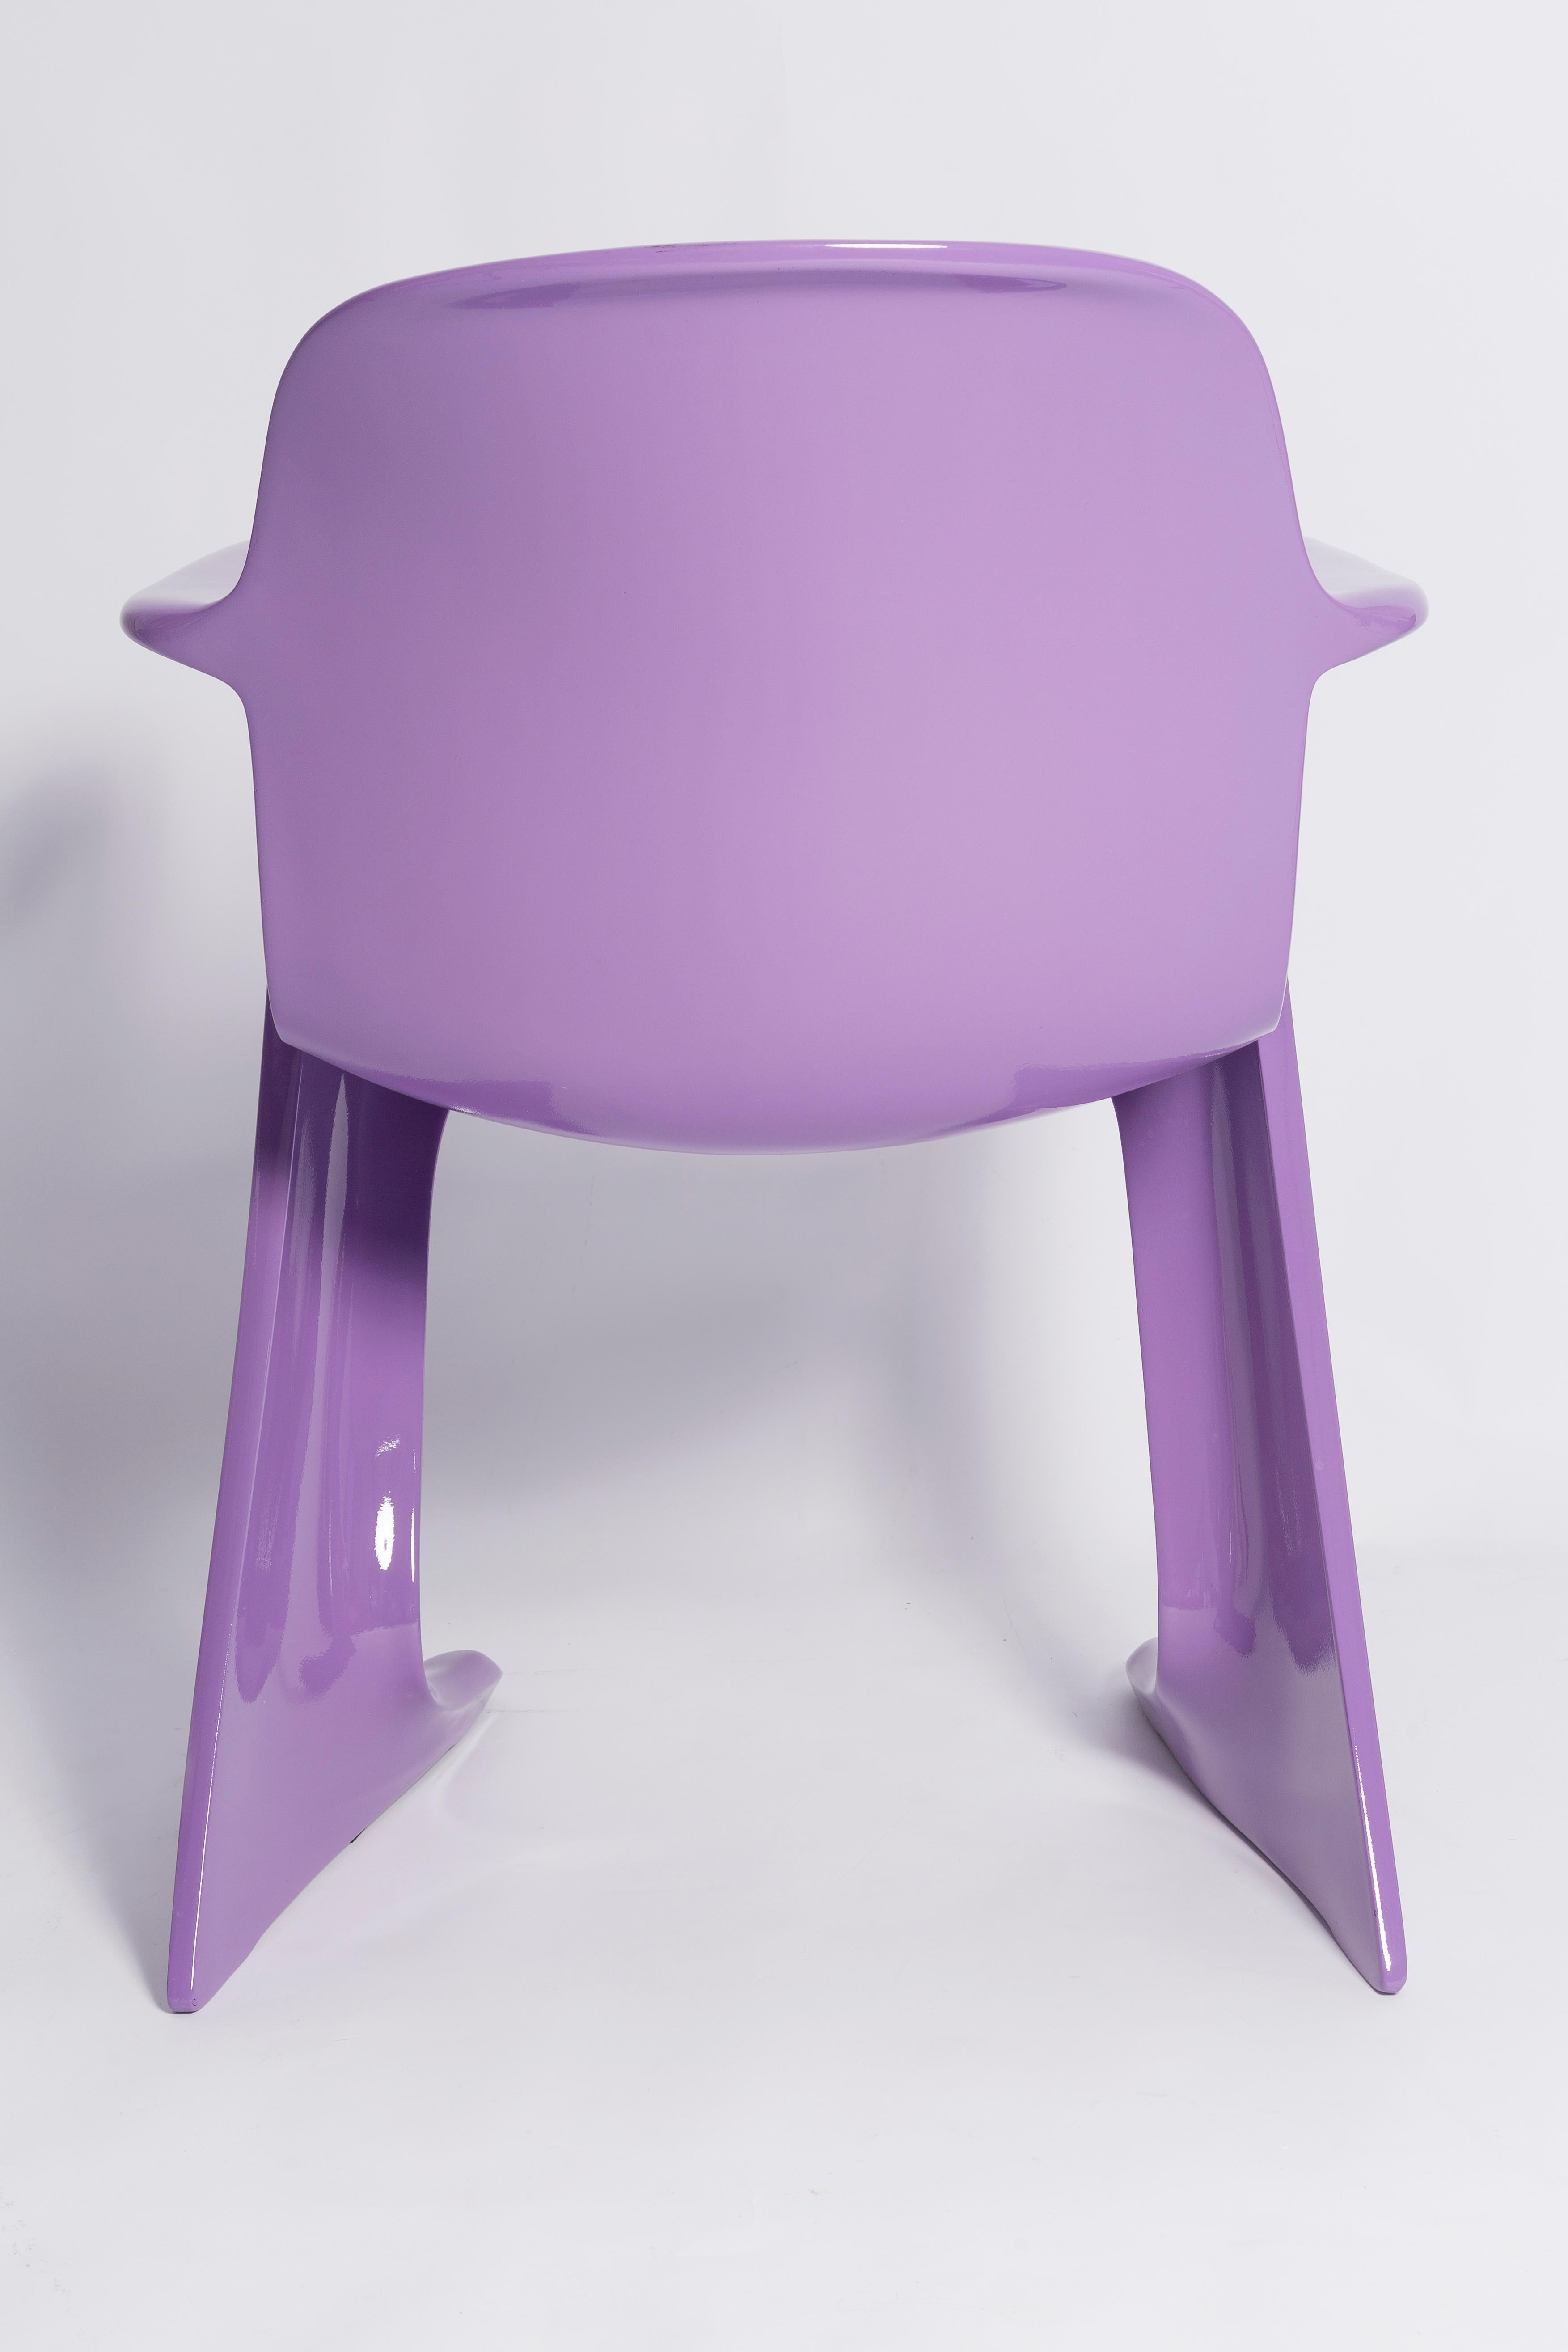 Set of Ten Blue Lilac Kangaroo Chairs Designed by Ernst Moeckl, Germany, 1968 For Sale 5